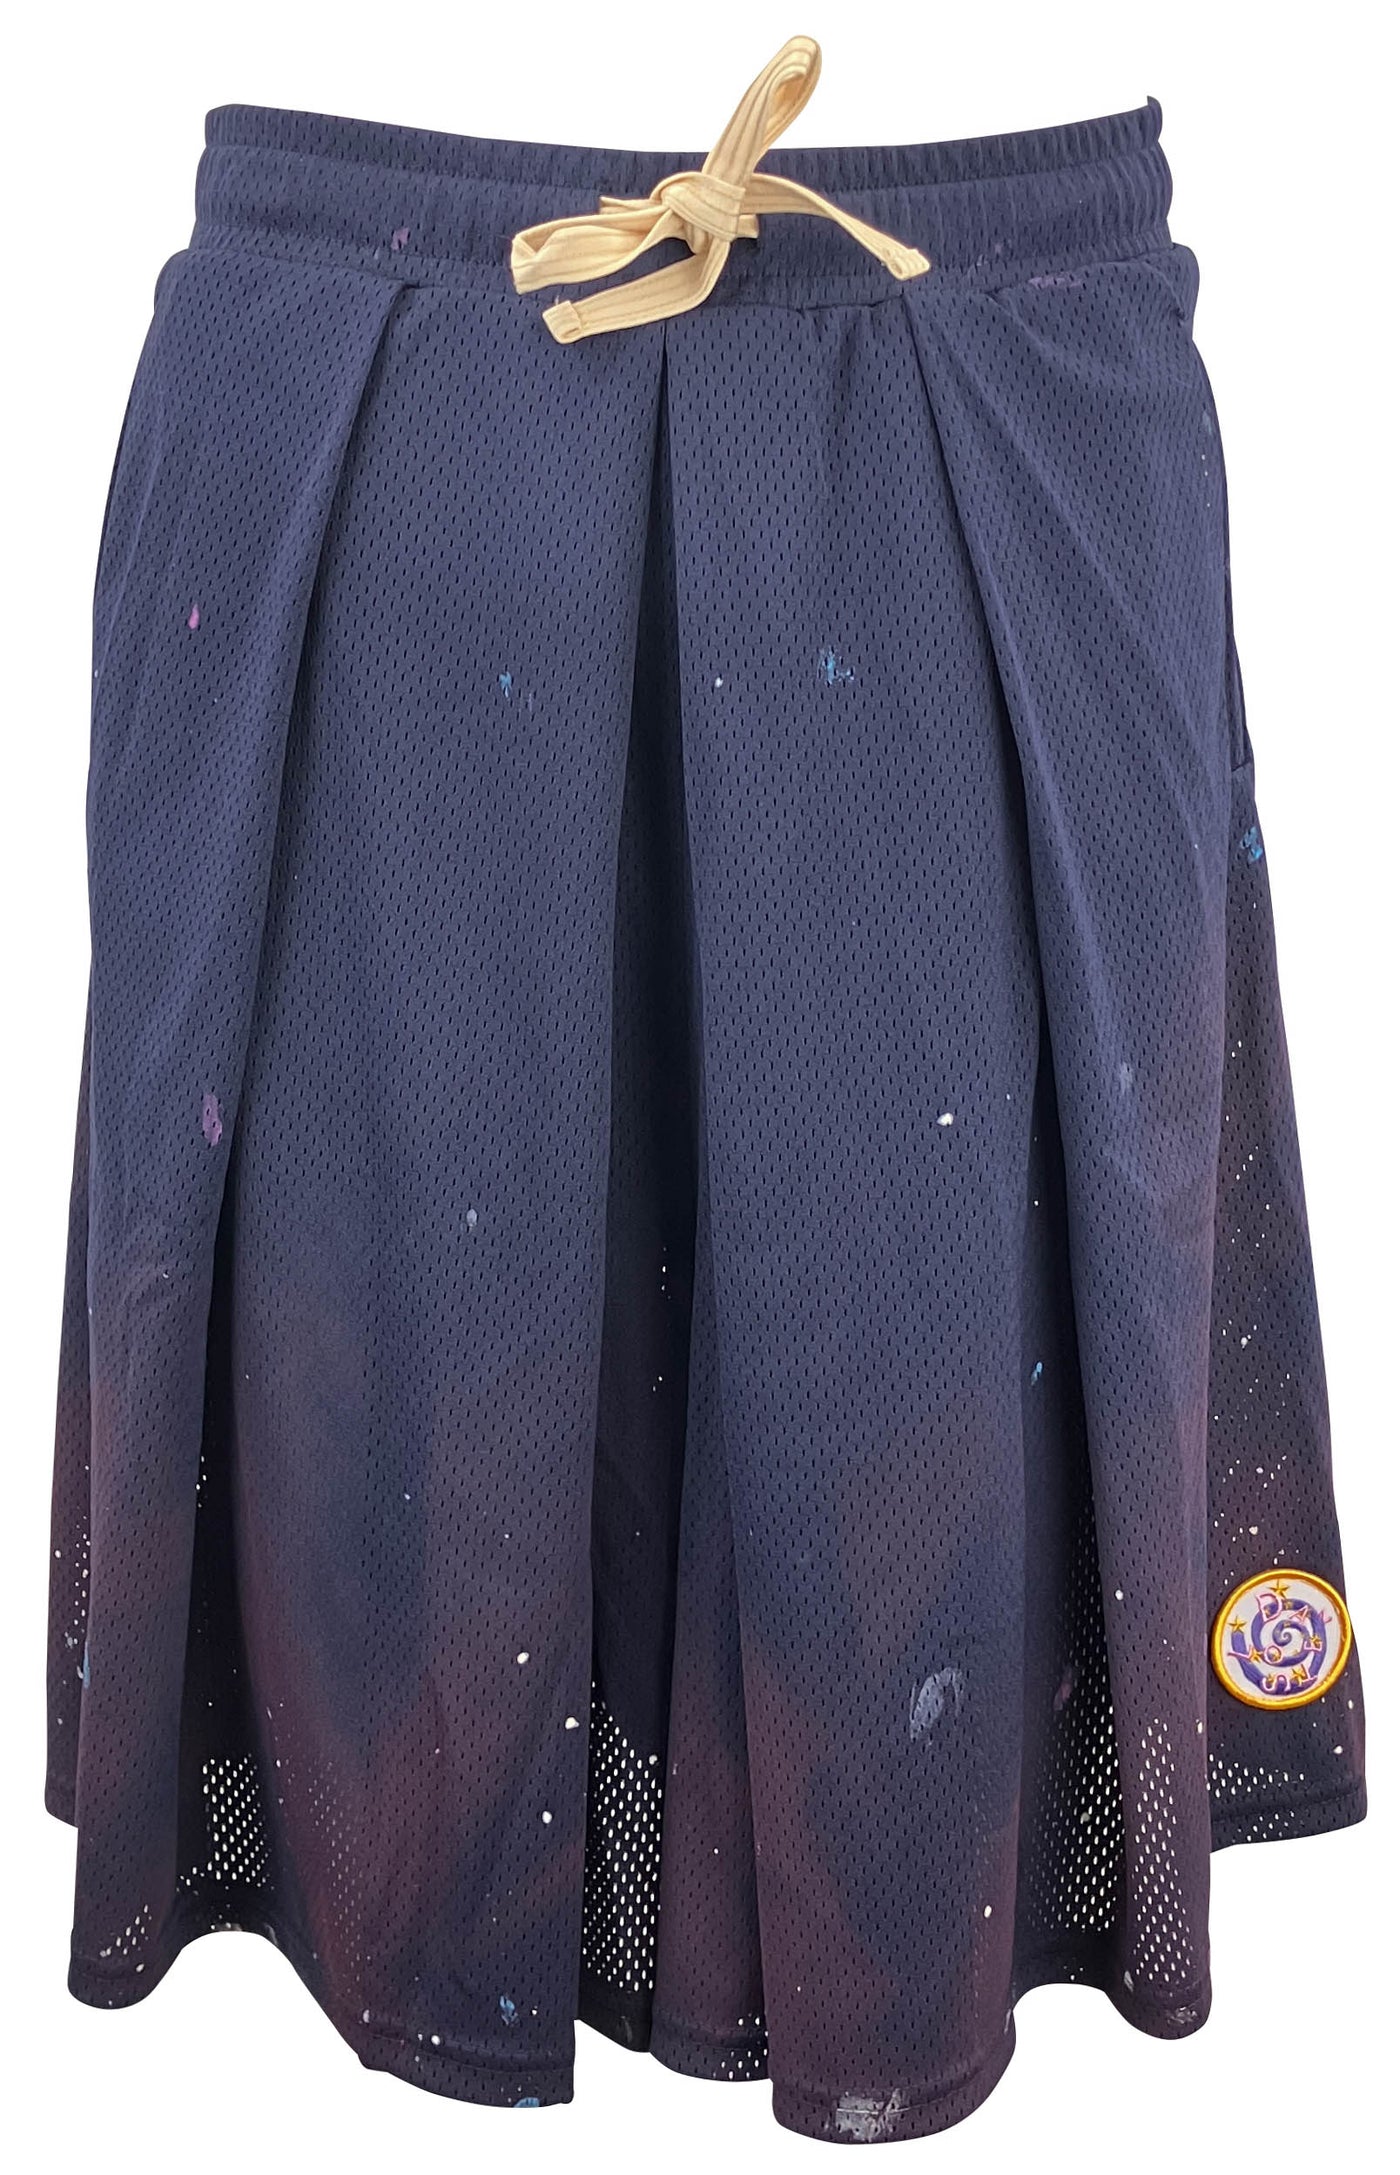 Lost Daze Hakama Shorts in Navy - Discounts on Lost Daze at UAL